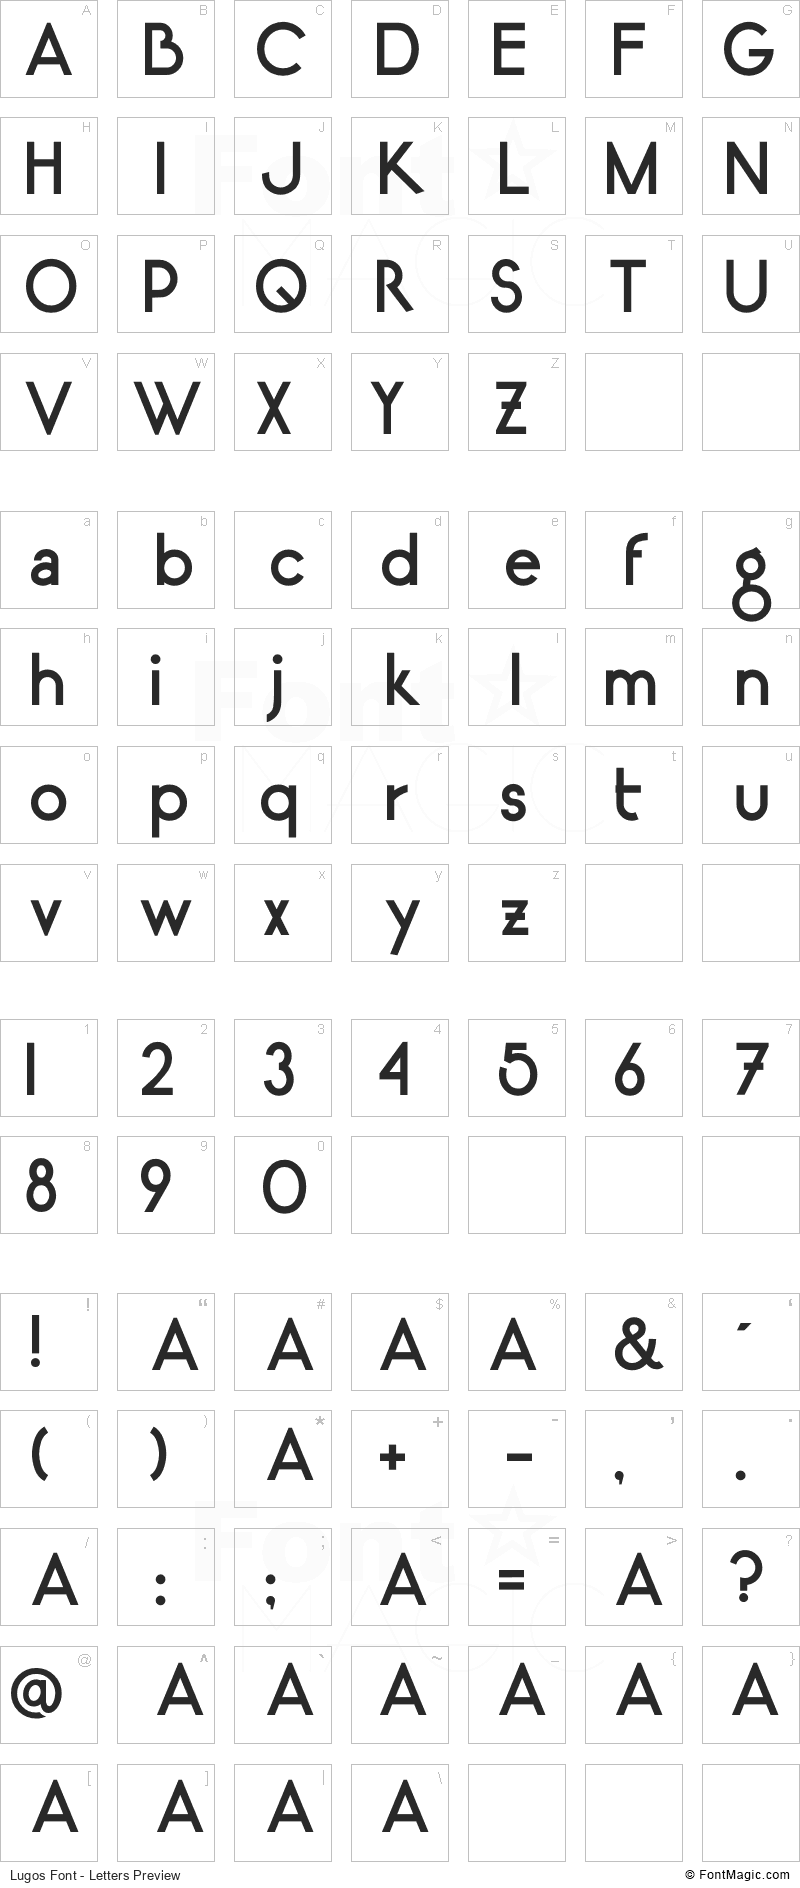 Lugos Font - All Latters Preview Chart